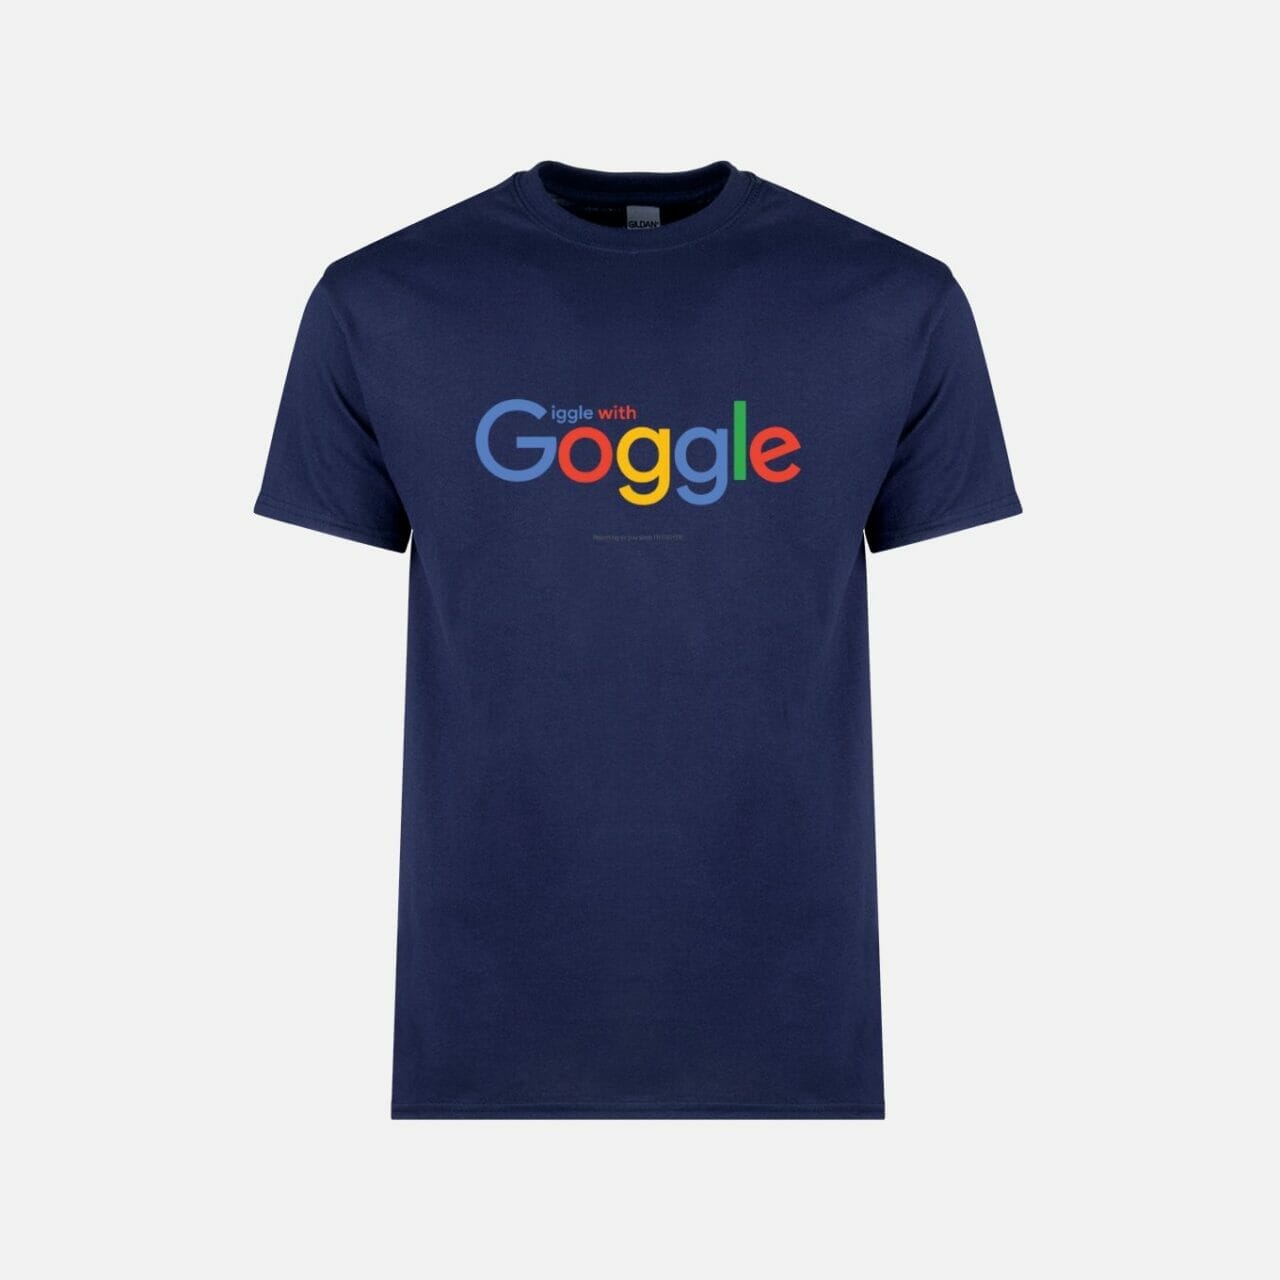 Giggle with Goggle T-Shirt